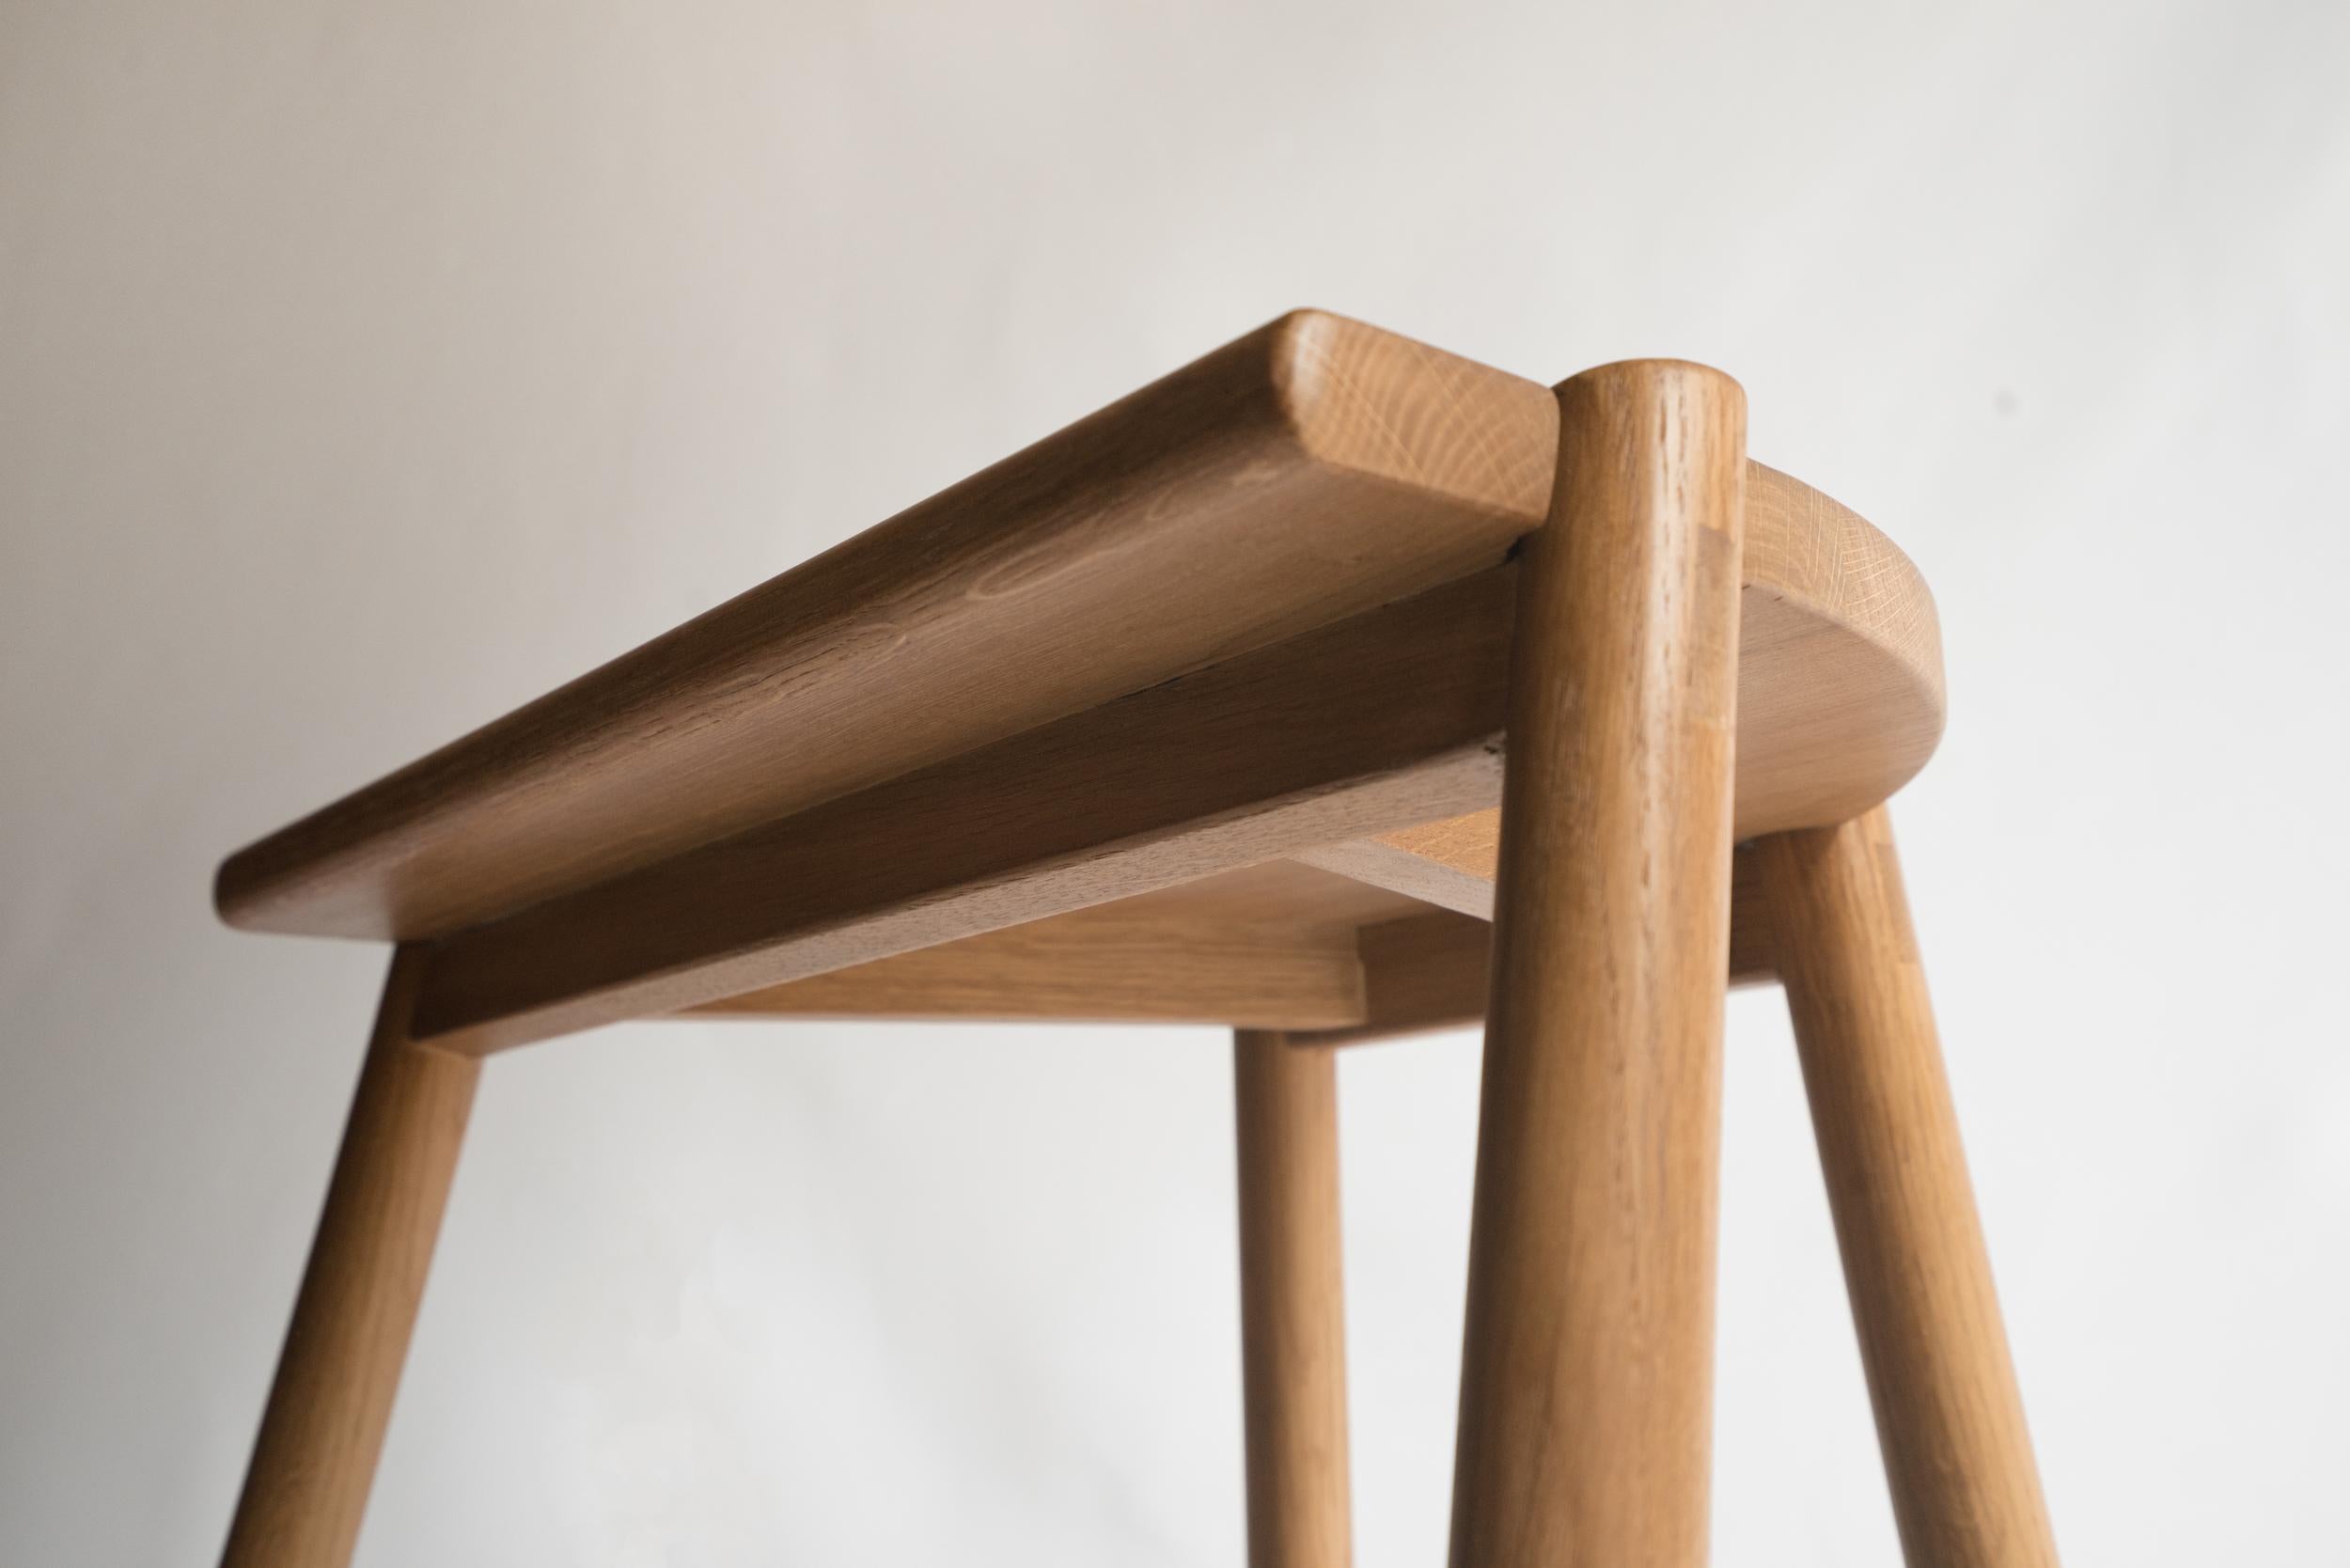 Joinery Moon Stool by Sun at Six, Sienna, Minimalist Counter Stool in Oak wood